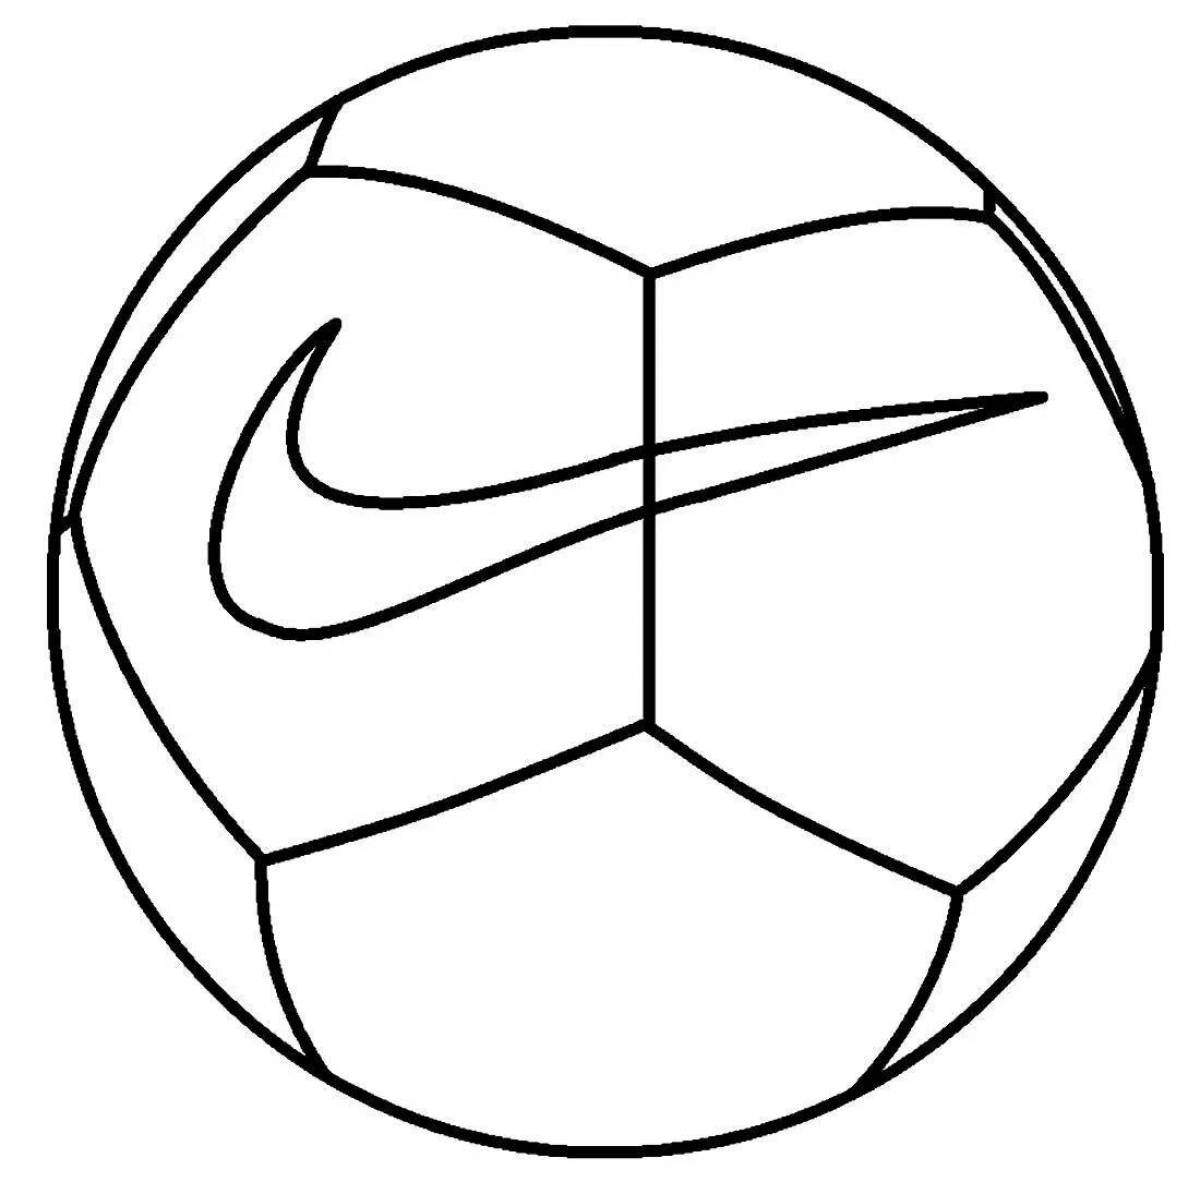 Creative soccer ball coloring for kids